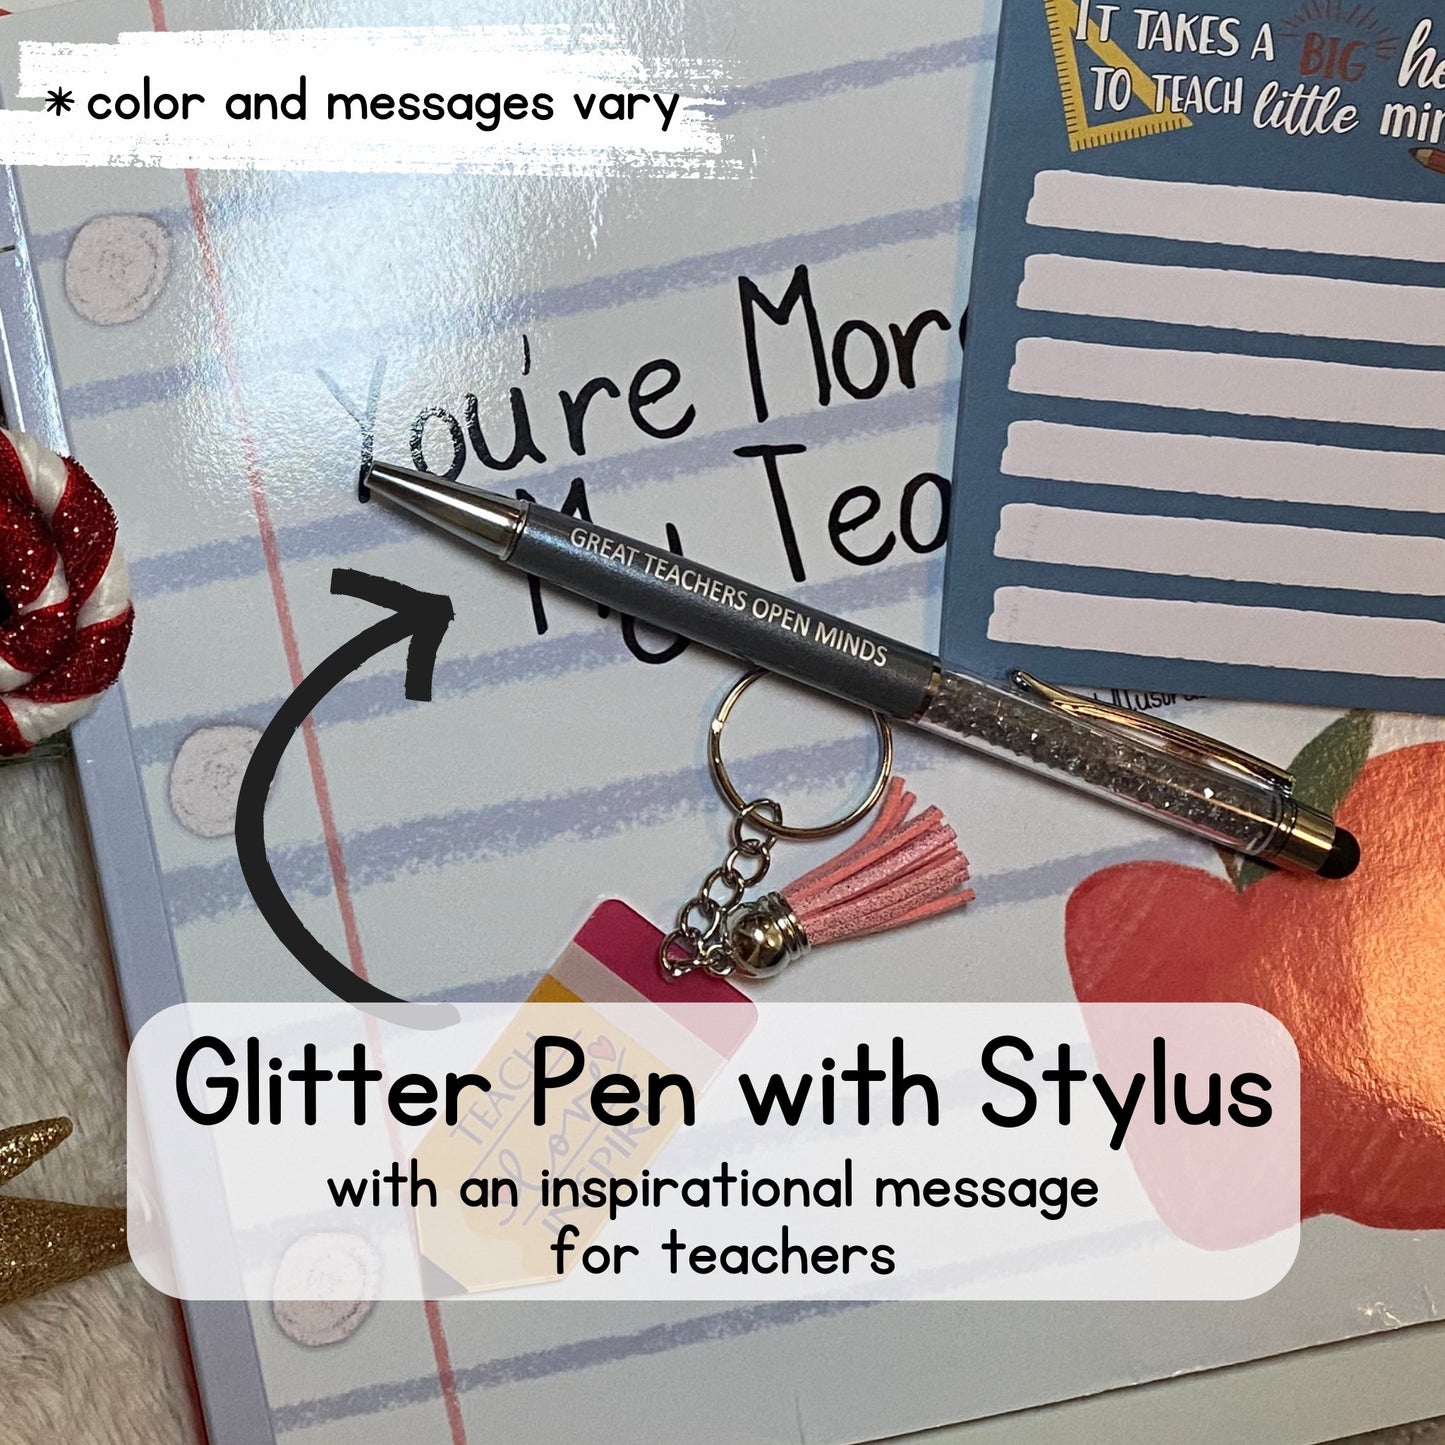 Image of one of the teacher themed glitter pen and stylus options included in the teacher gift set self published through Amazon KDP and Kindle Direct Publishing that includes a personalized copy of "You're More Than My Teacher."